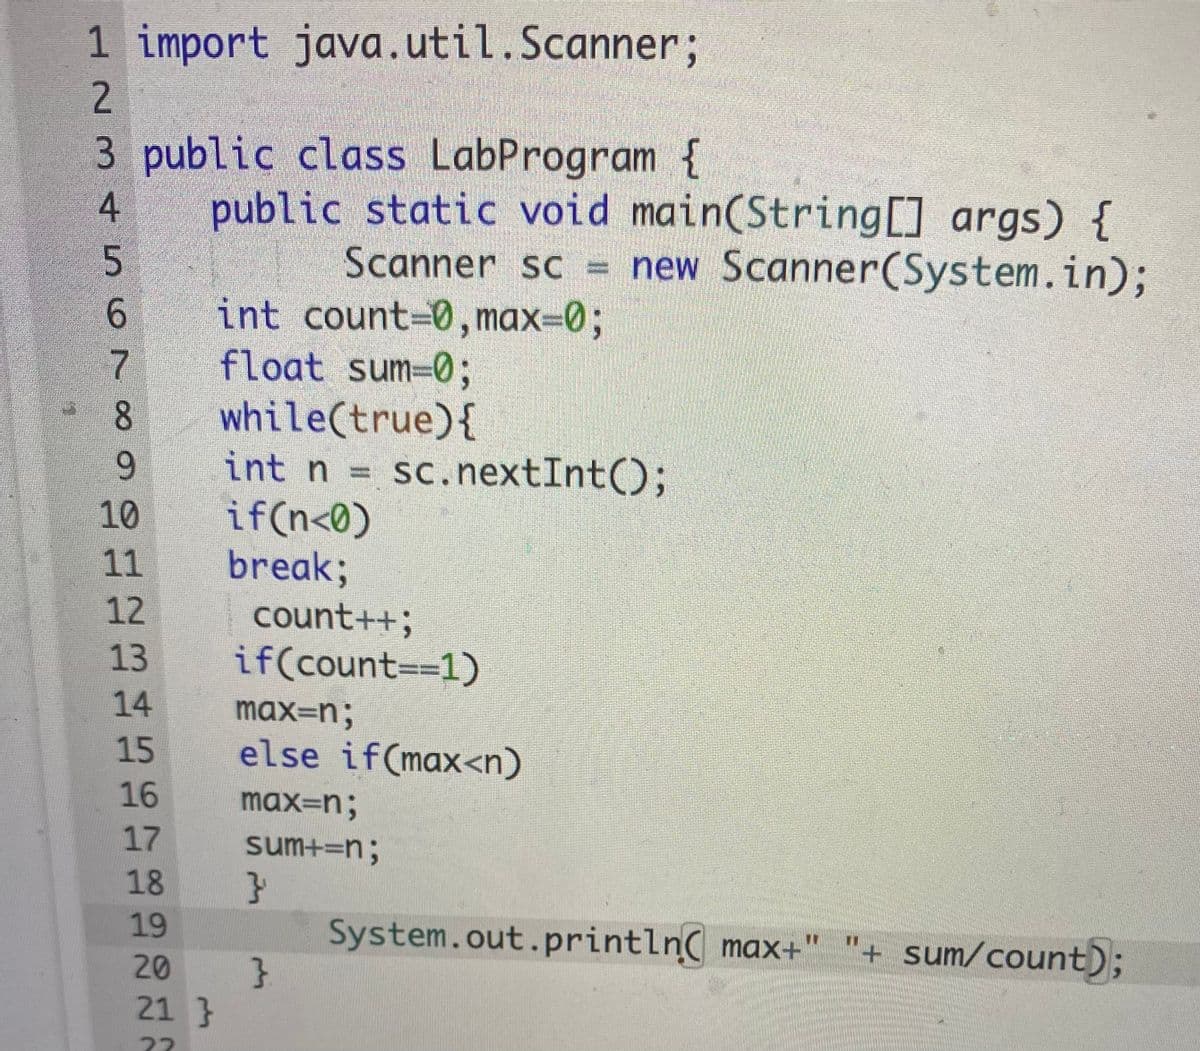 1 import java.util.Scanner;
2.
3 public class LabProgram {
public static void main(String[] args) {
Scanner sc = new Scanner(System.in);
int count-0, max3D0%3B
float sum=0;
while(true){
int n =
if(n<0)
break;
count++;
if(count=31)
4
6.
6.
sc. nextInt();
10
11
12
13
14
max=n;
15
else if(max<n)
16
max=n;
17
sum+=n;
18
}
System.out.println max+" "+ sum/count);
}
19
20
21 }
22
